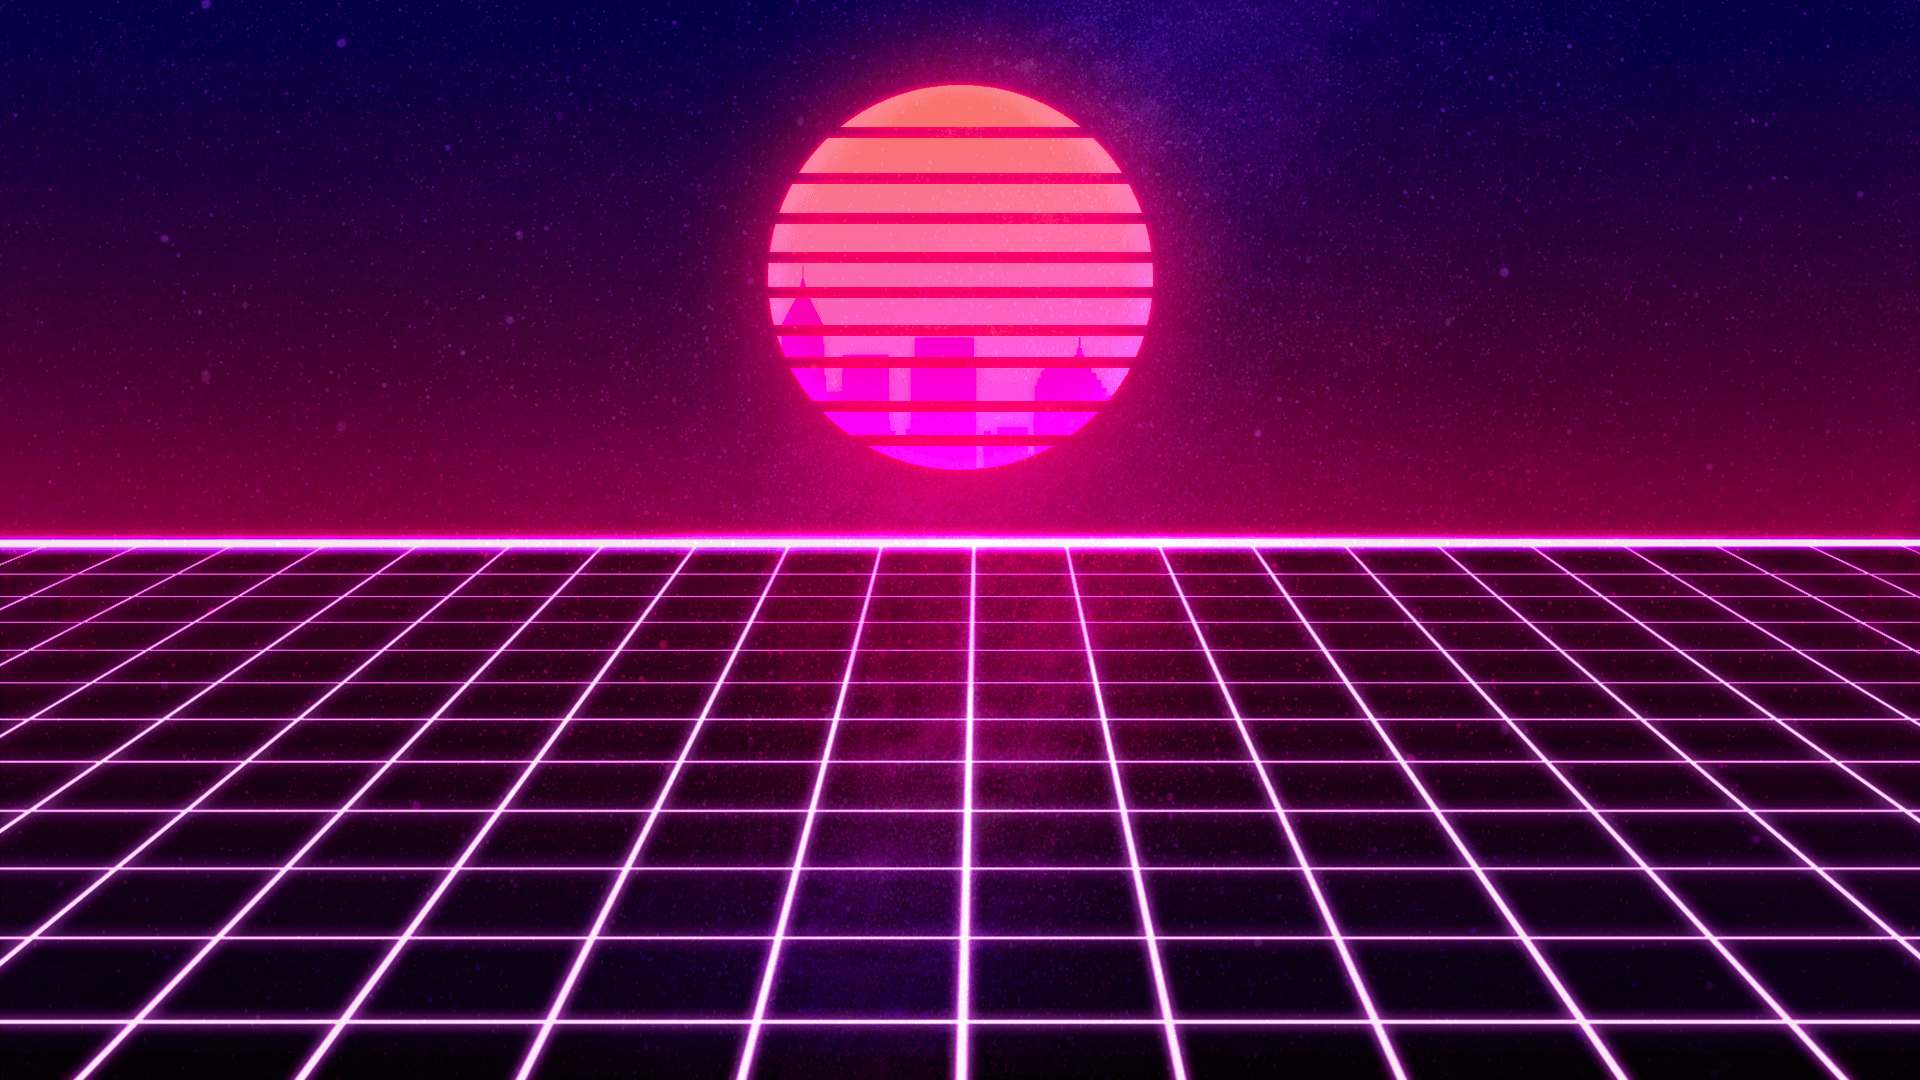 80's Style Wallpaper [1920x1080]. Aesthetic. Cool 80s